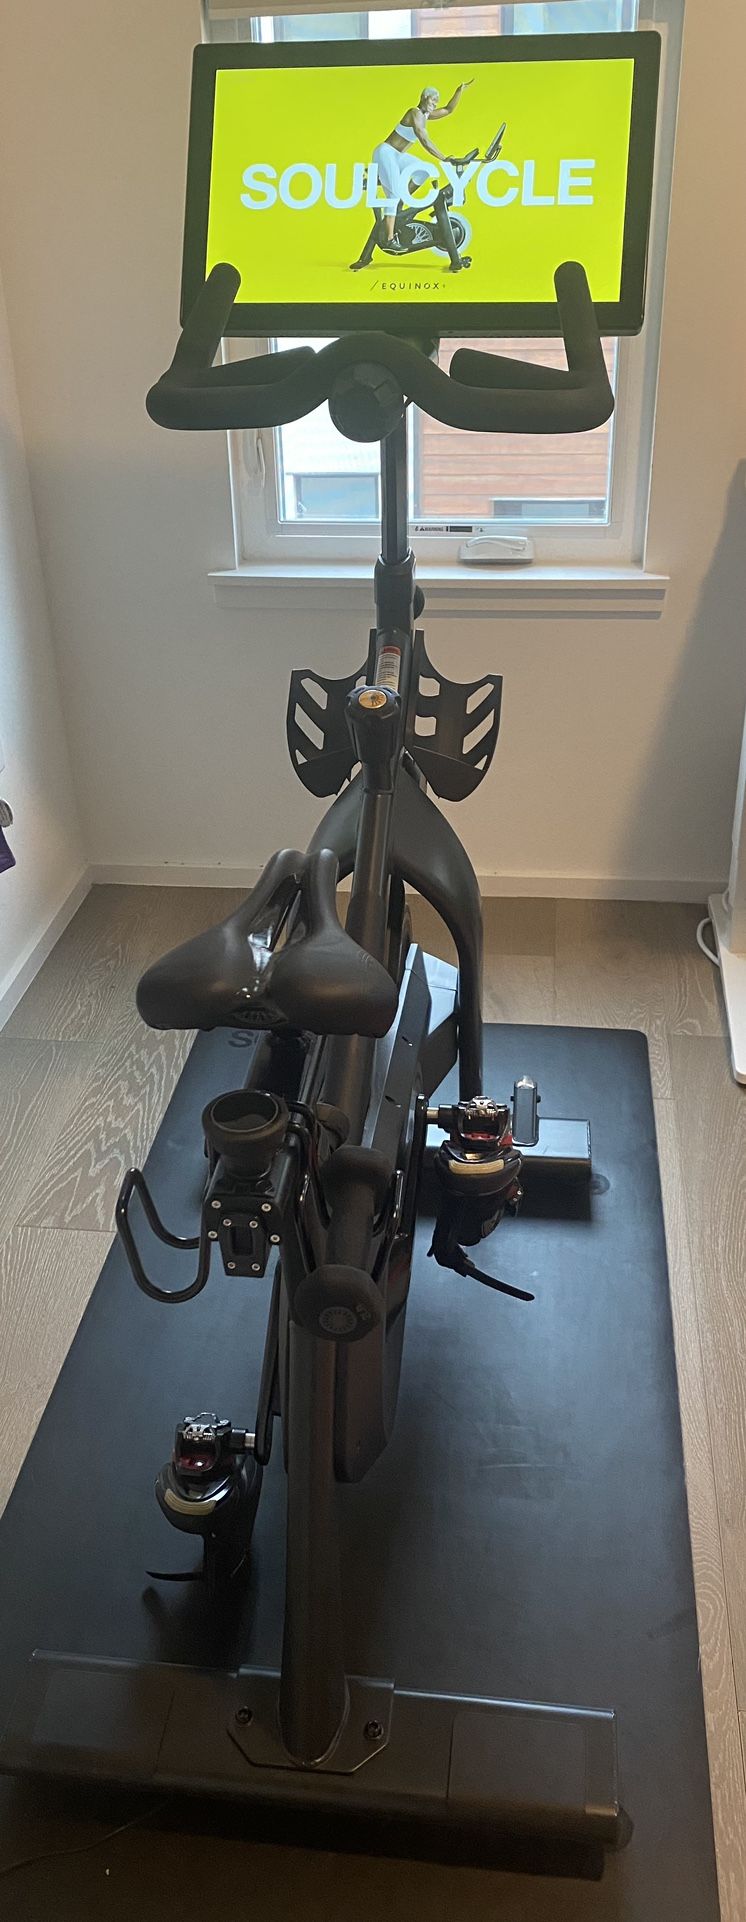 Soul cycle At Home Bike For Sale!